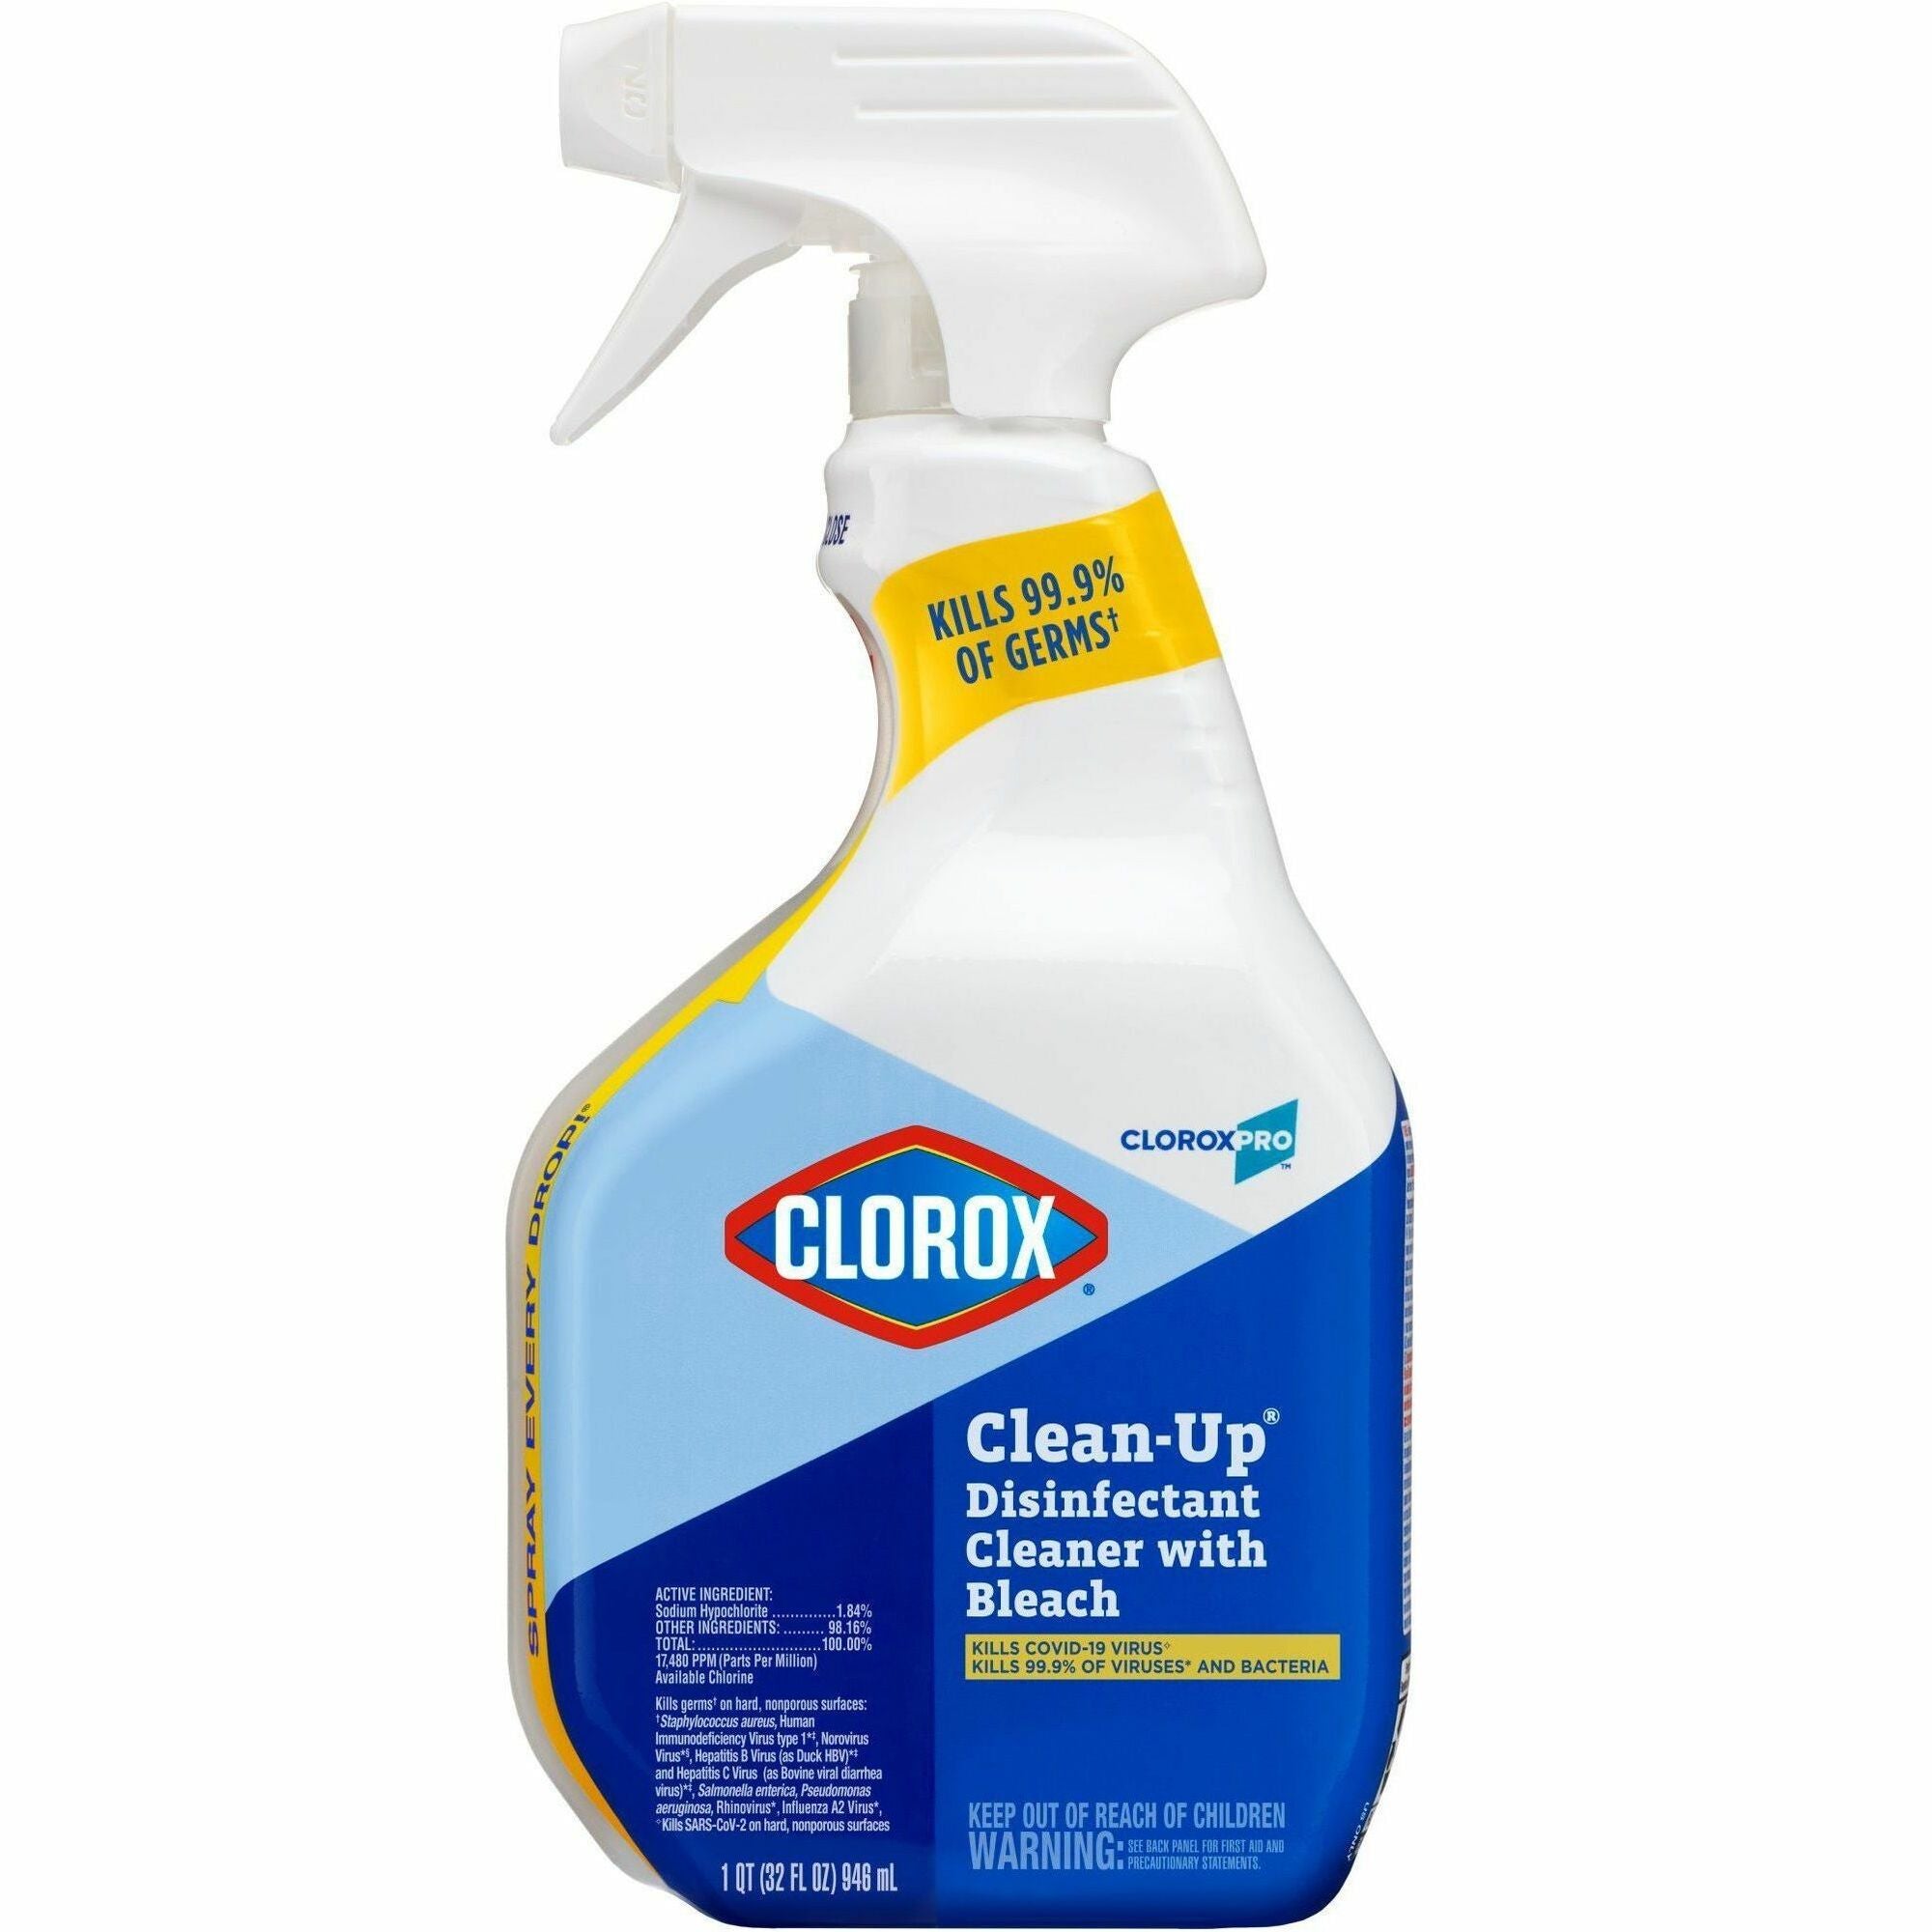 CloroxPro Clean-Up Disinfectant Cleaner with Bleach - Ready-To-Use - 32 fl oz (1 quart) - 432 / Pallet - Antibacterial, Disinfectant - Clear - 1